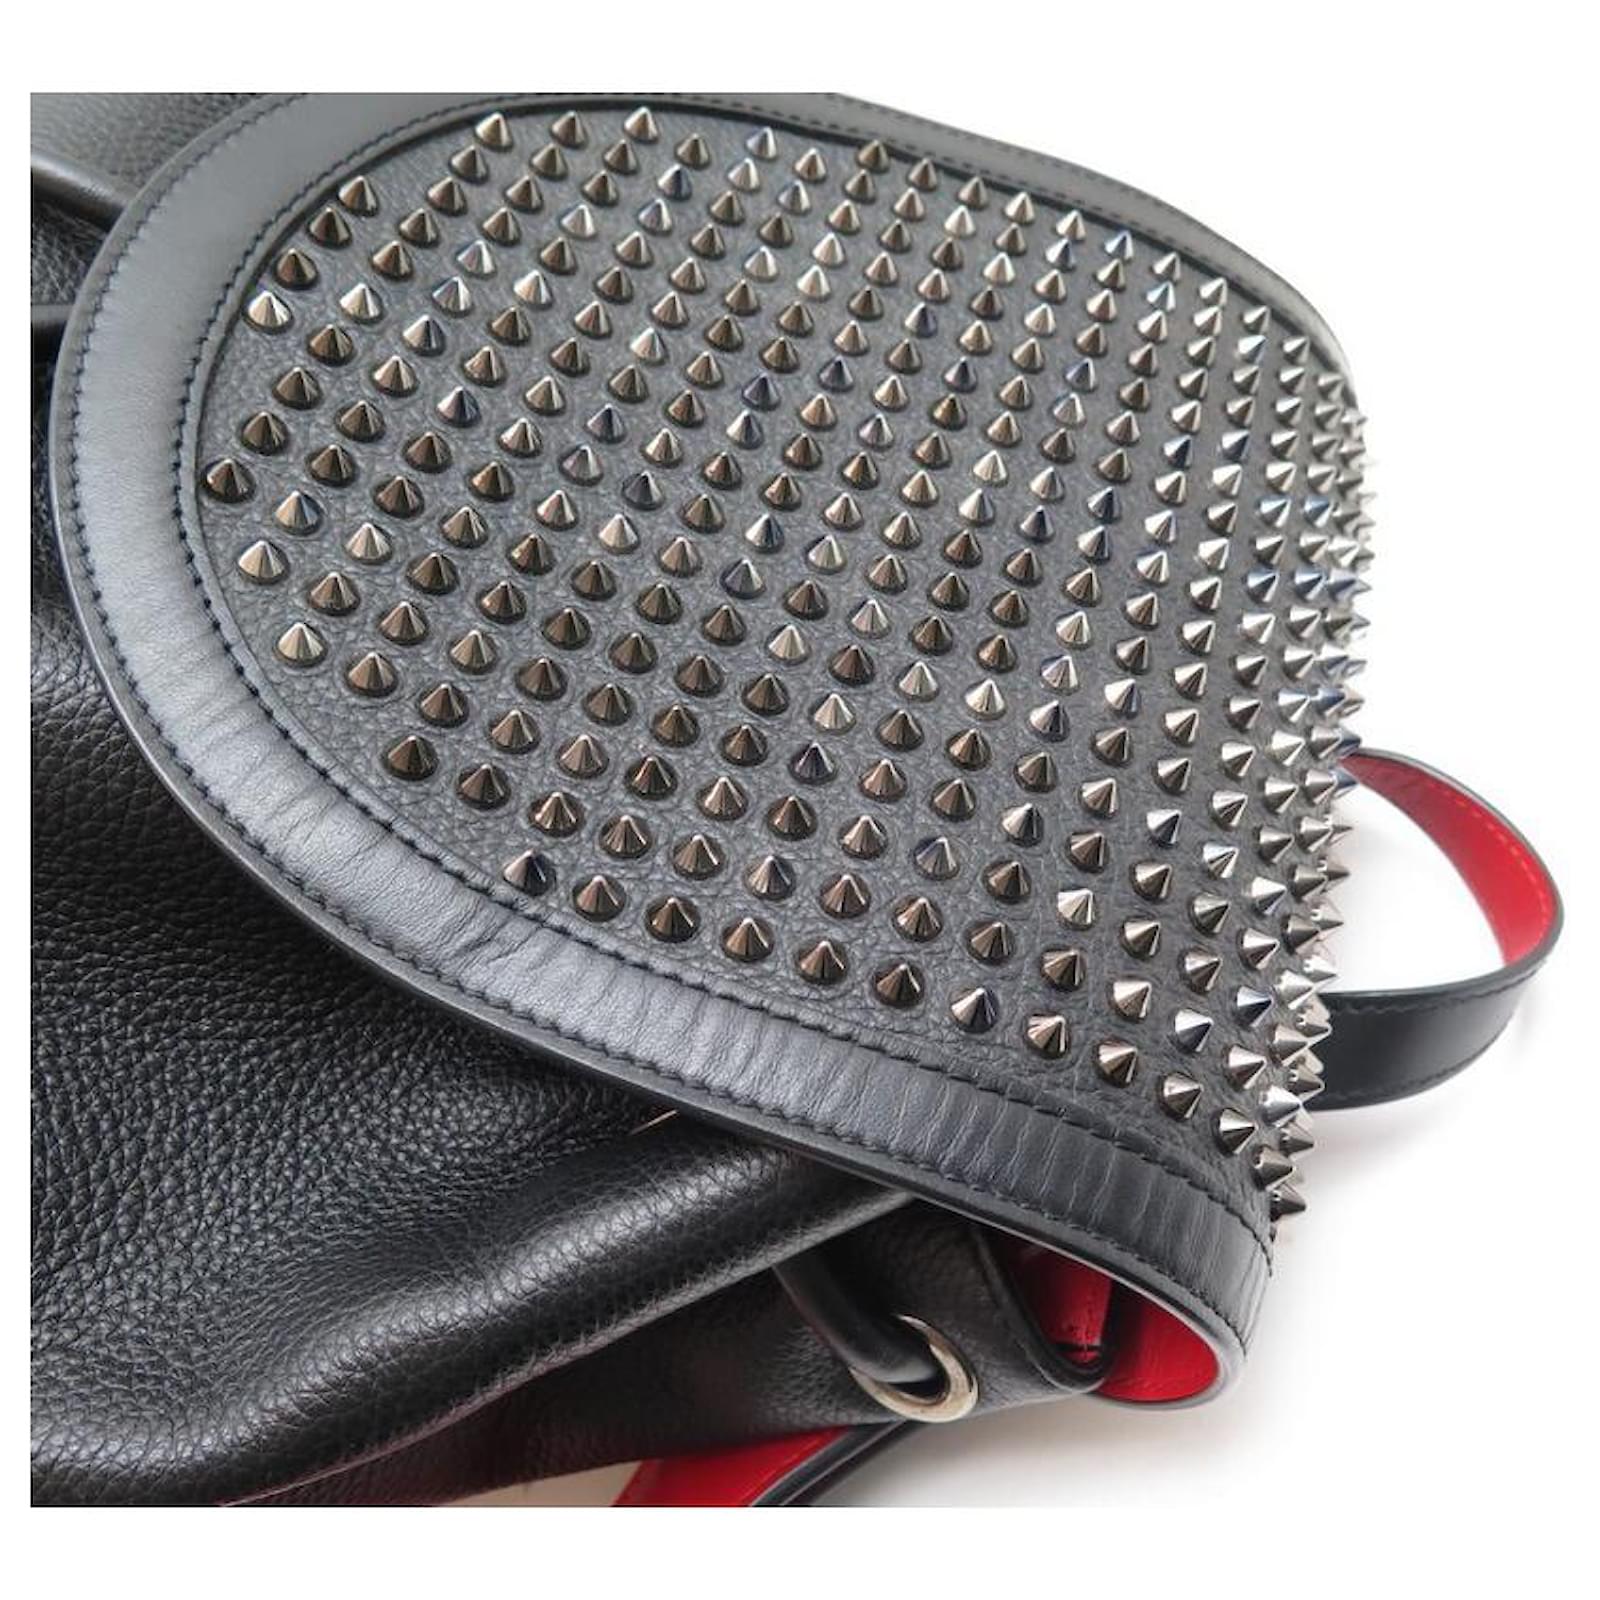 CHRISTIAN LOUBOUTIN: Explorafunk wallet bag in grained leather with Spikes  - Black